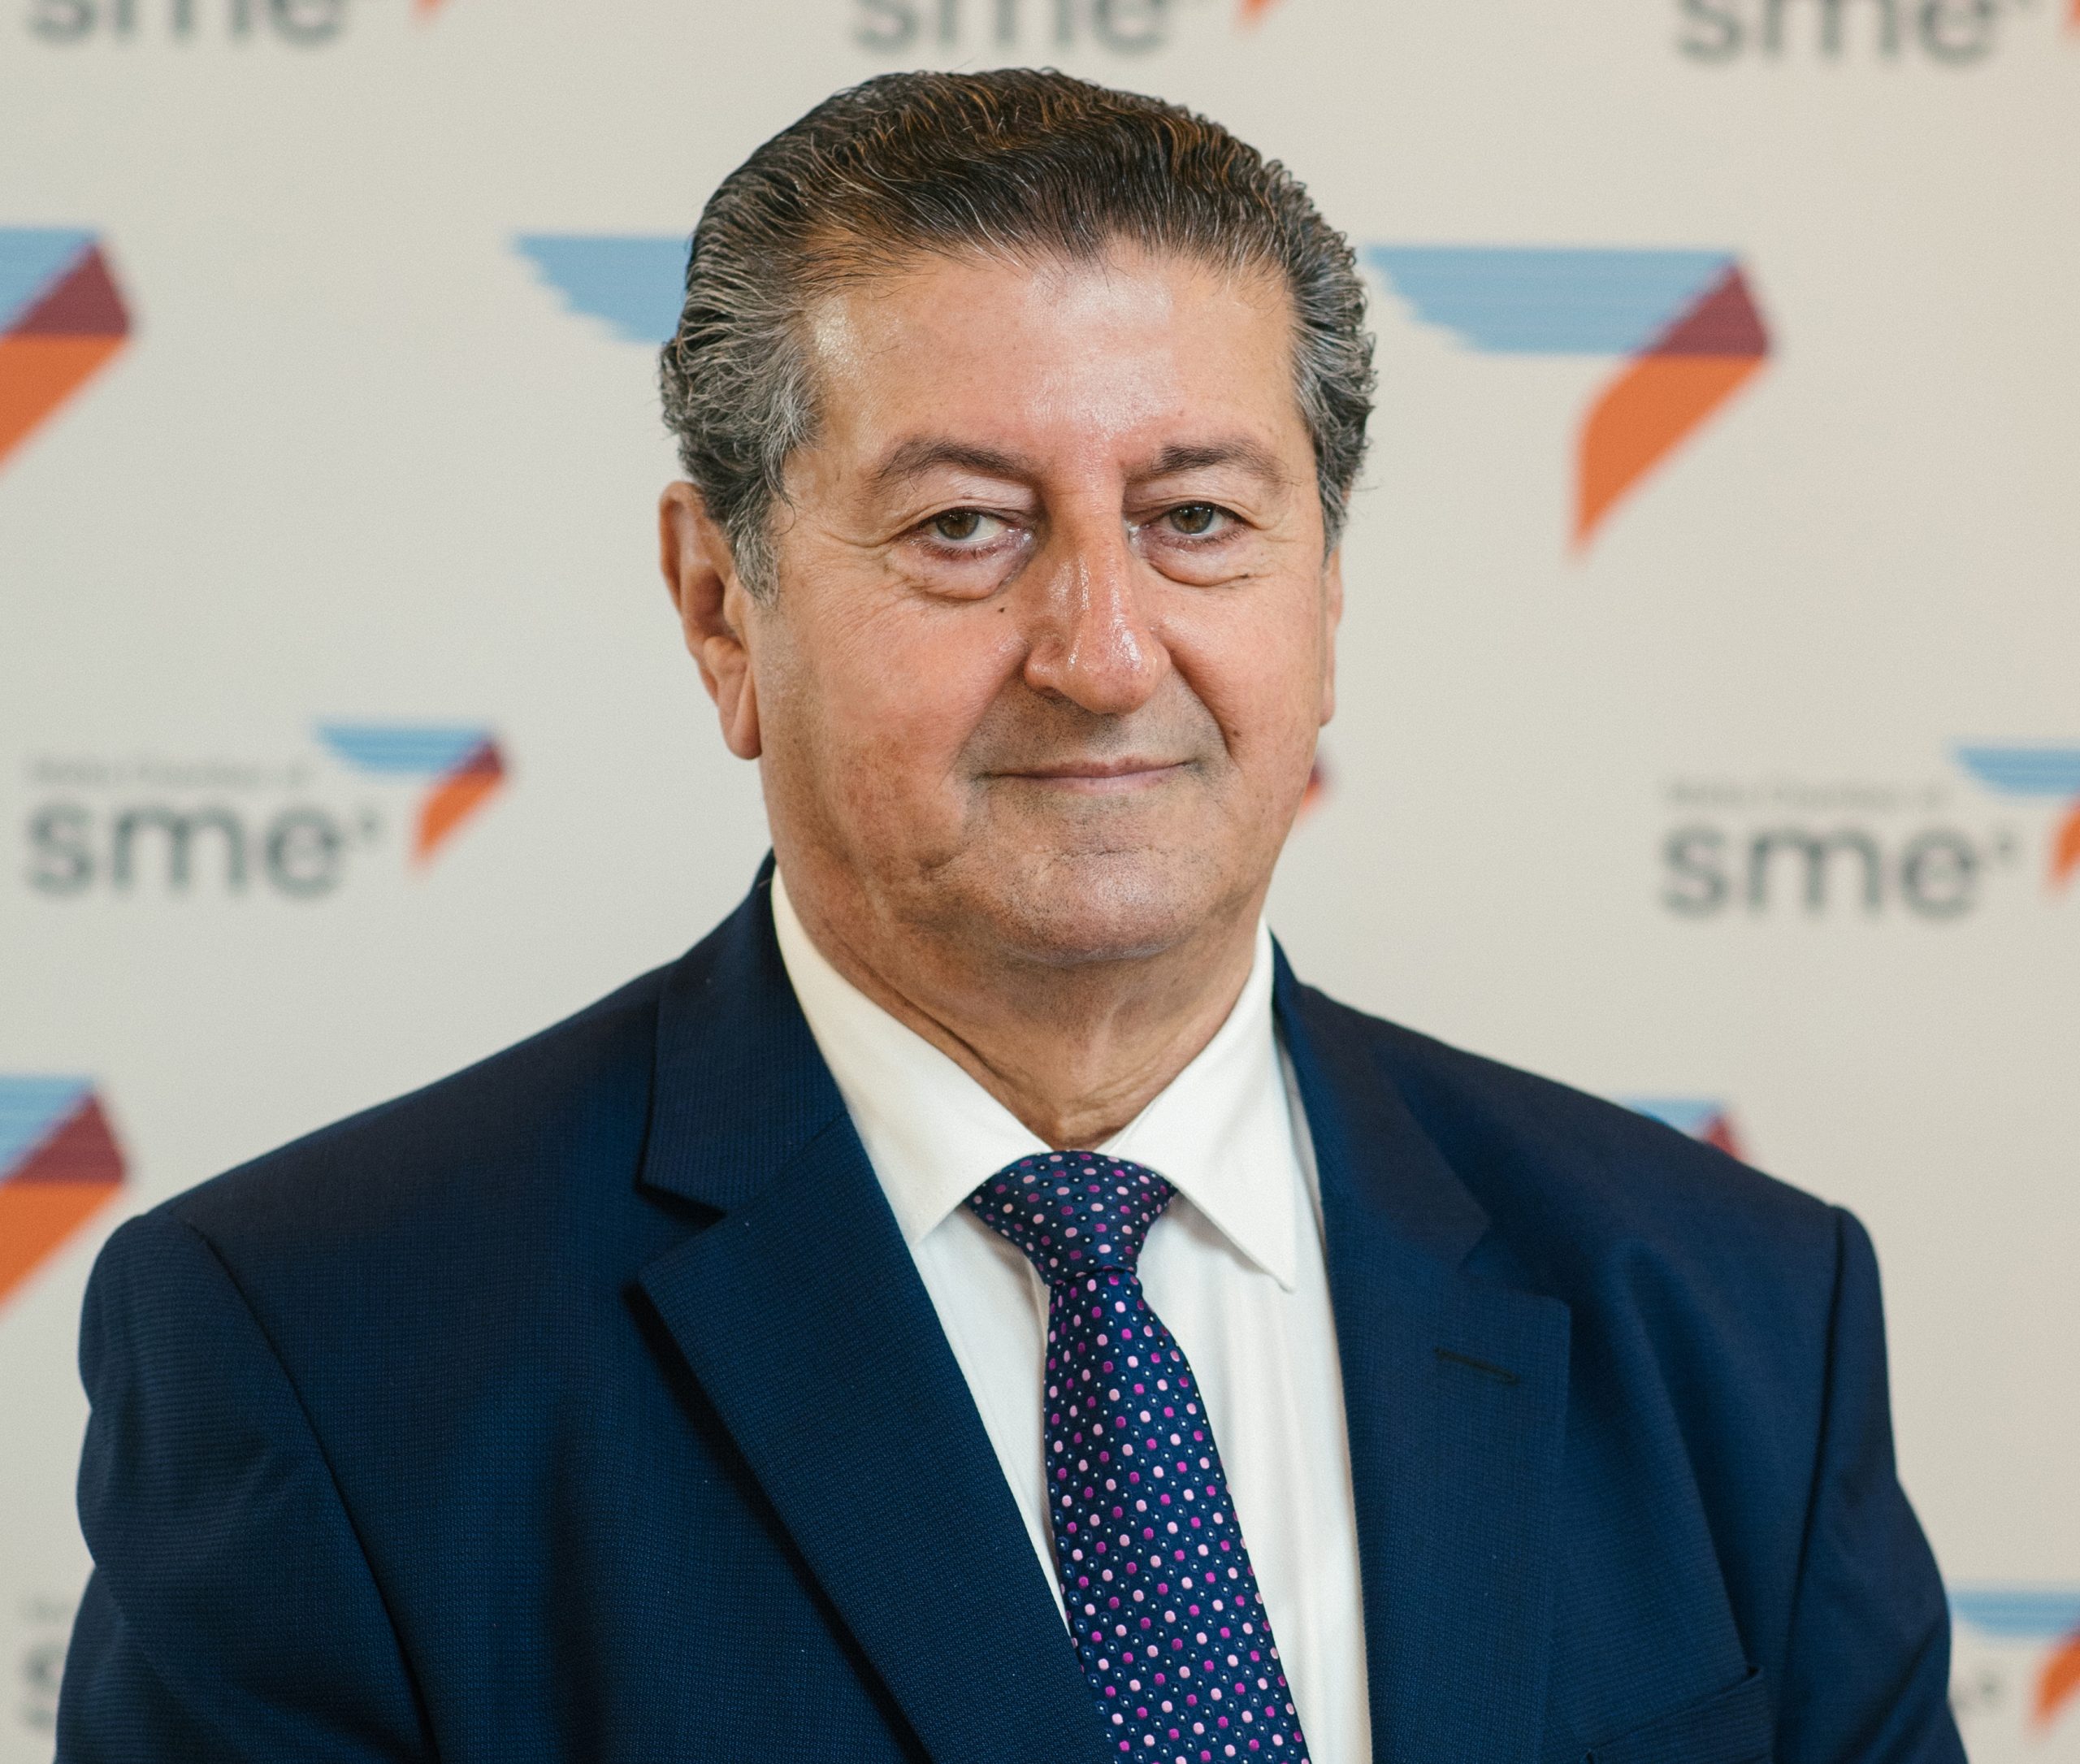 Paul Abela confirmed as President of the Malta Chamber of SMEs